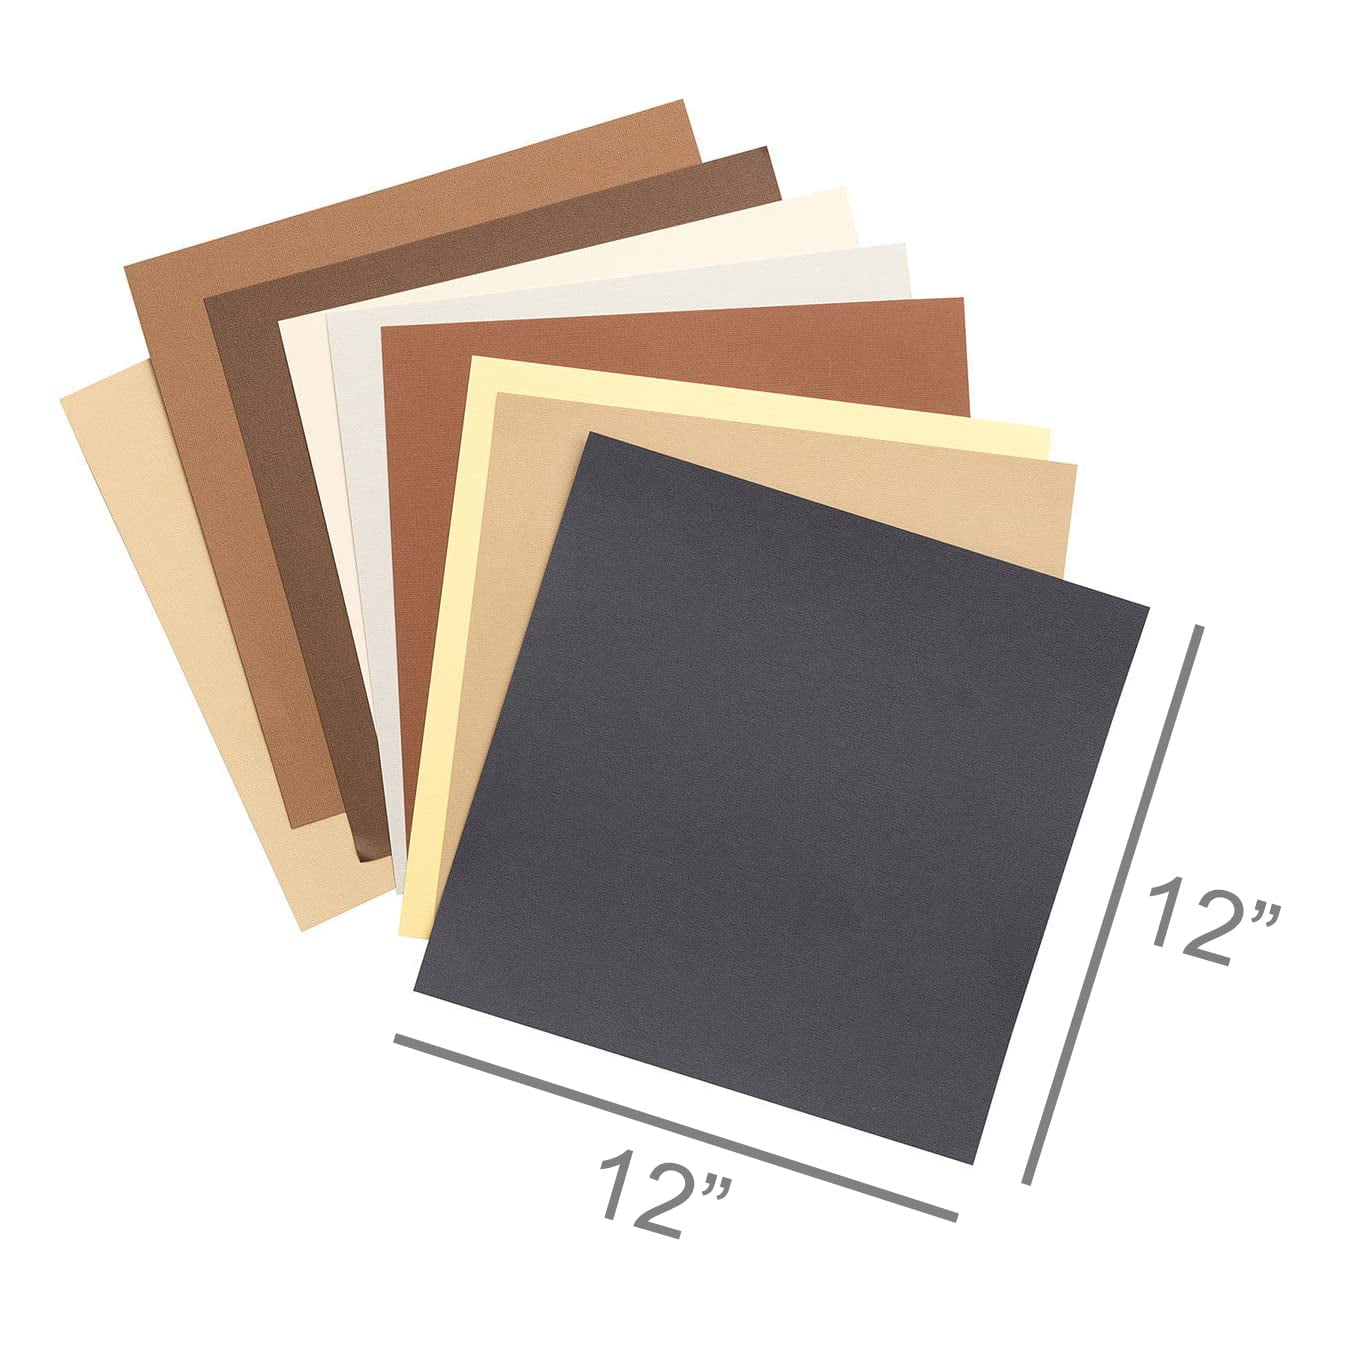 Bazzill BROWN 12x12 Textured Cardstock | 80 lb Standard Brown Scrapbook  Paper | Premium Card Making and Paper Crafting Supplies | 25 Sheets per Pack